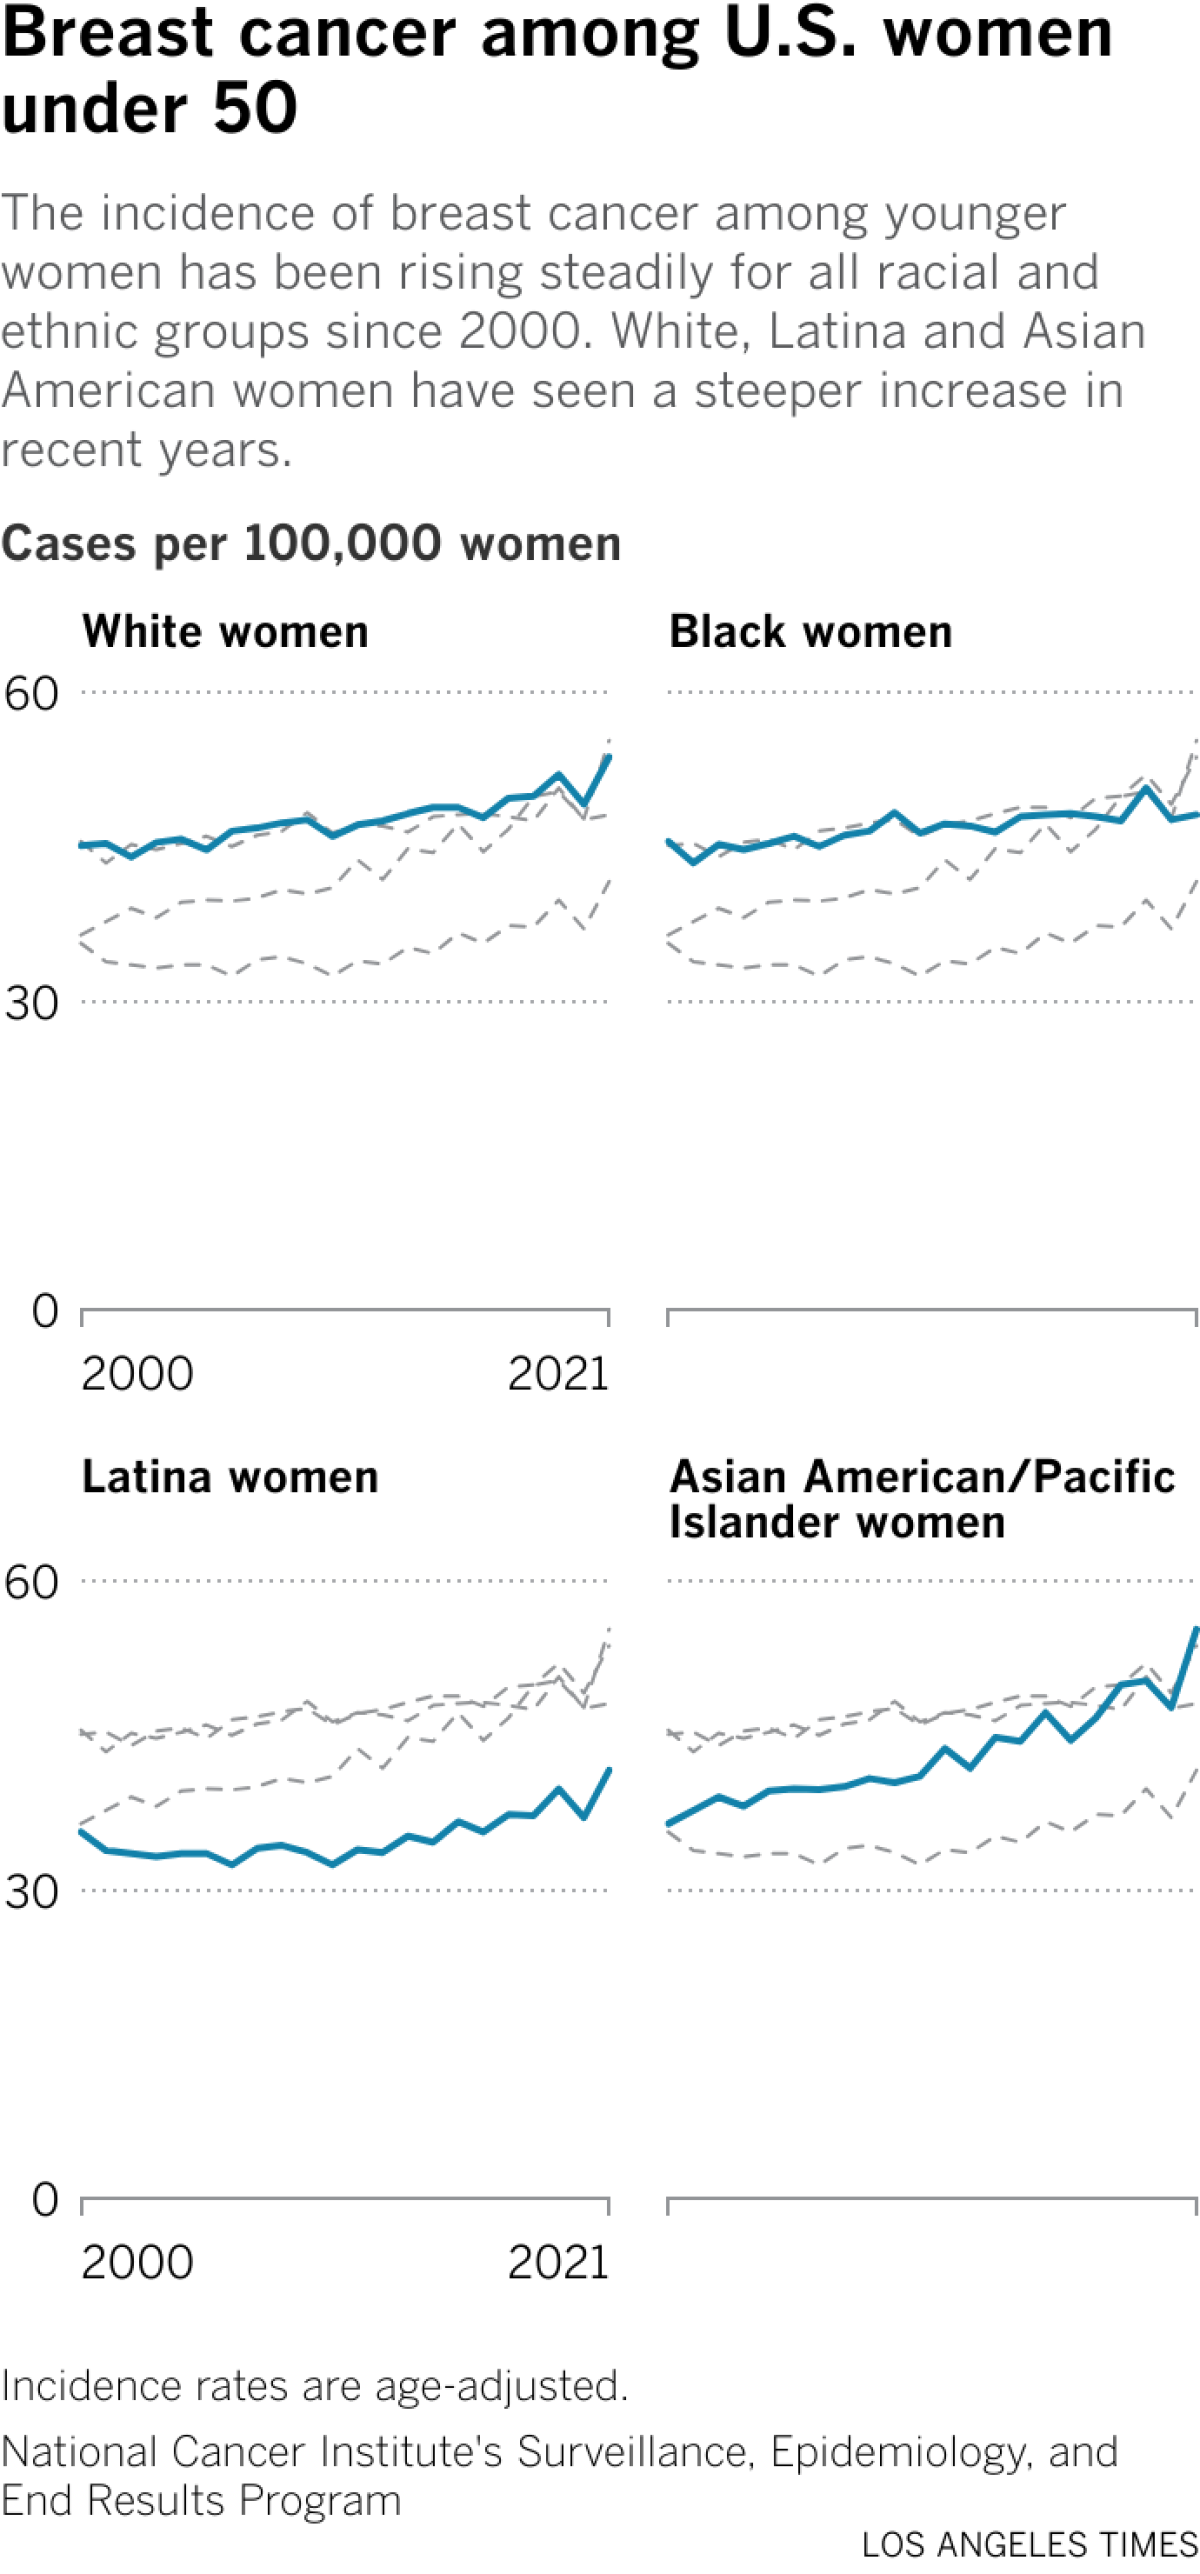 A line graph compares breast cancer rates in women under 50 by race.  In 2021, the rate for white women was 53.7 cases per 100,000 women.  The rate for black women was 48.1;  for Latina women, 41.6;  and for Asian American/Pacific Islander women, 55.3.